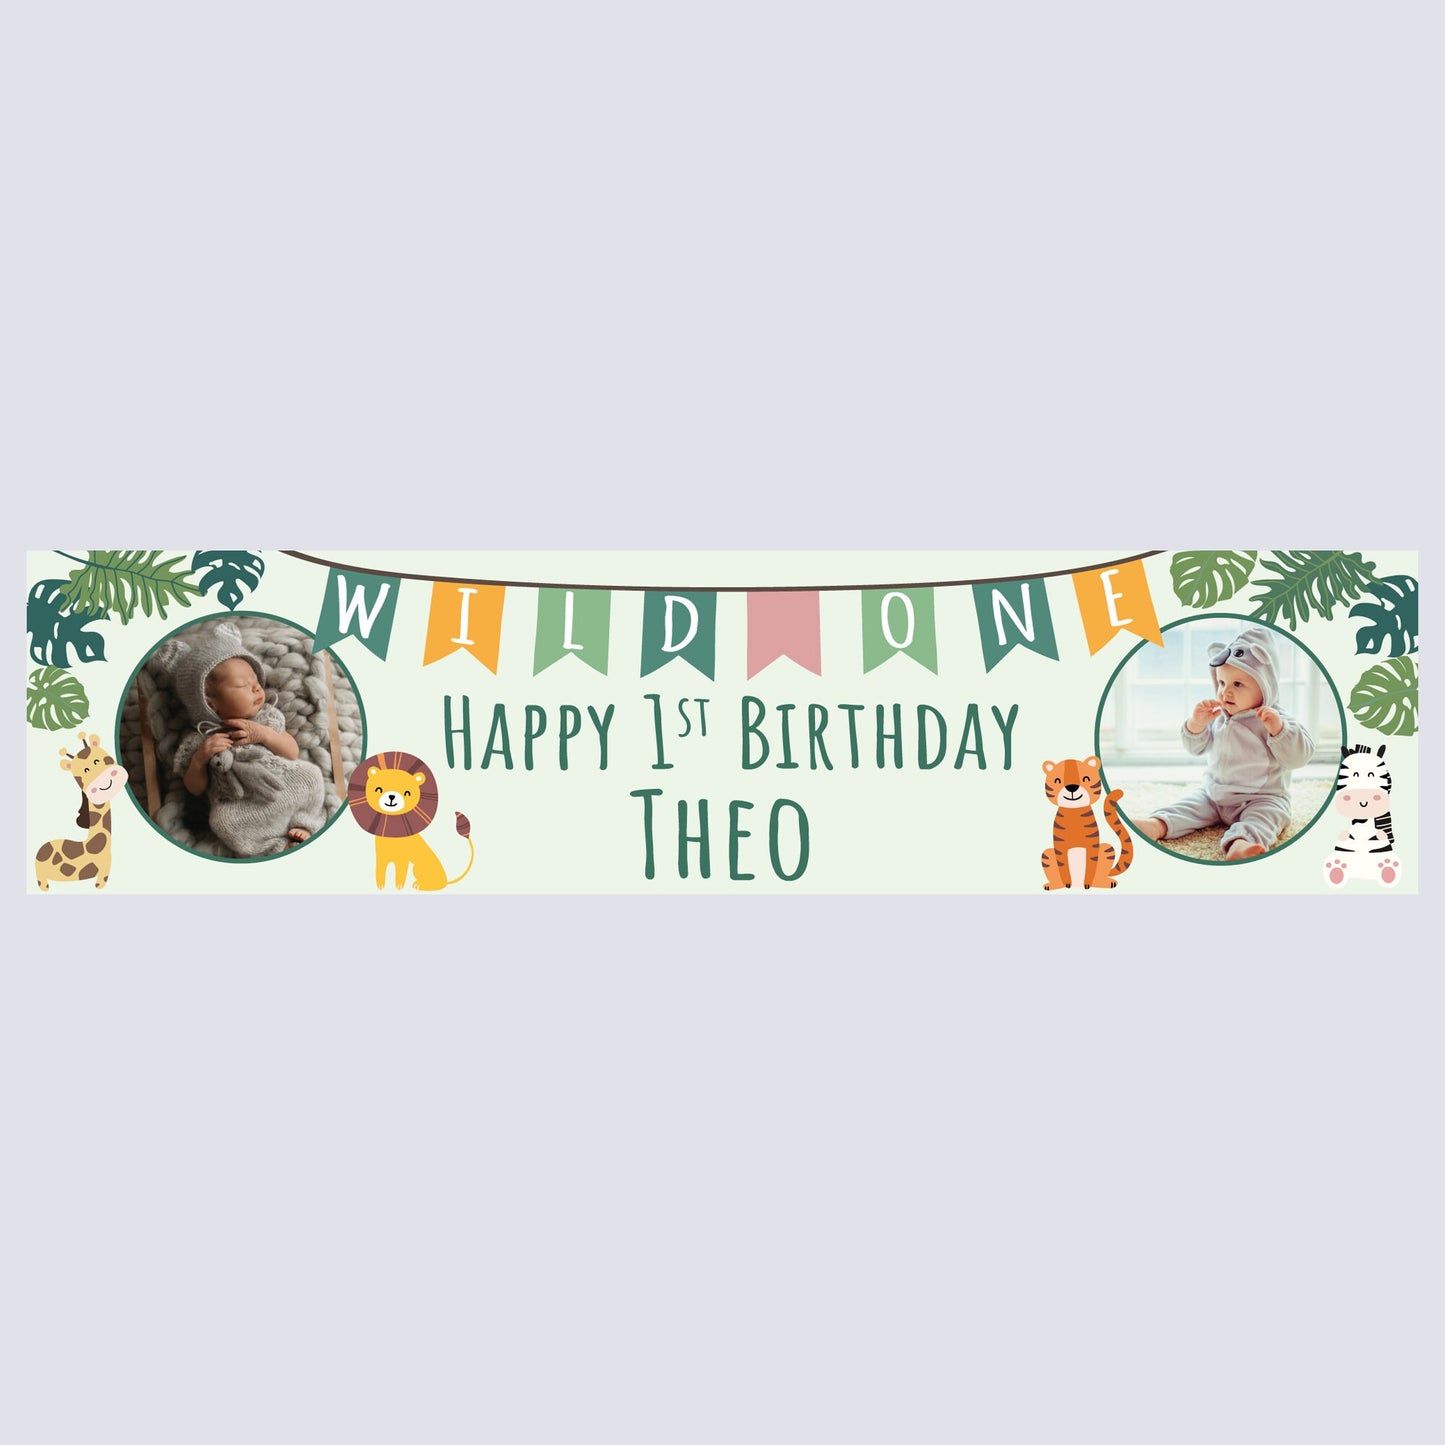 Personalised Banner - Wild One Banner with Photo Personalised Jungle Banner or Personalised Cut-Out Jungle Banner 5m